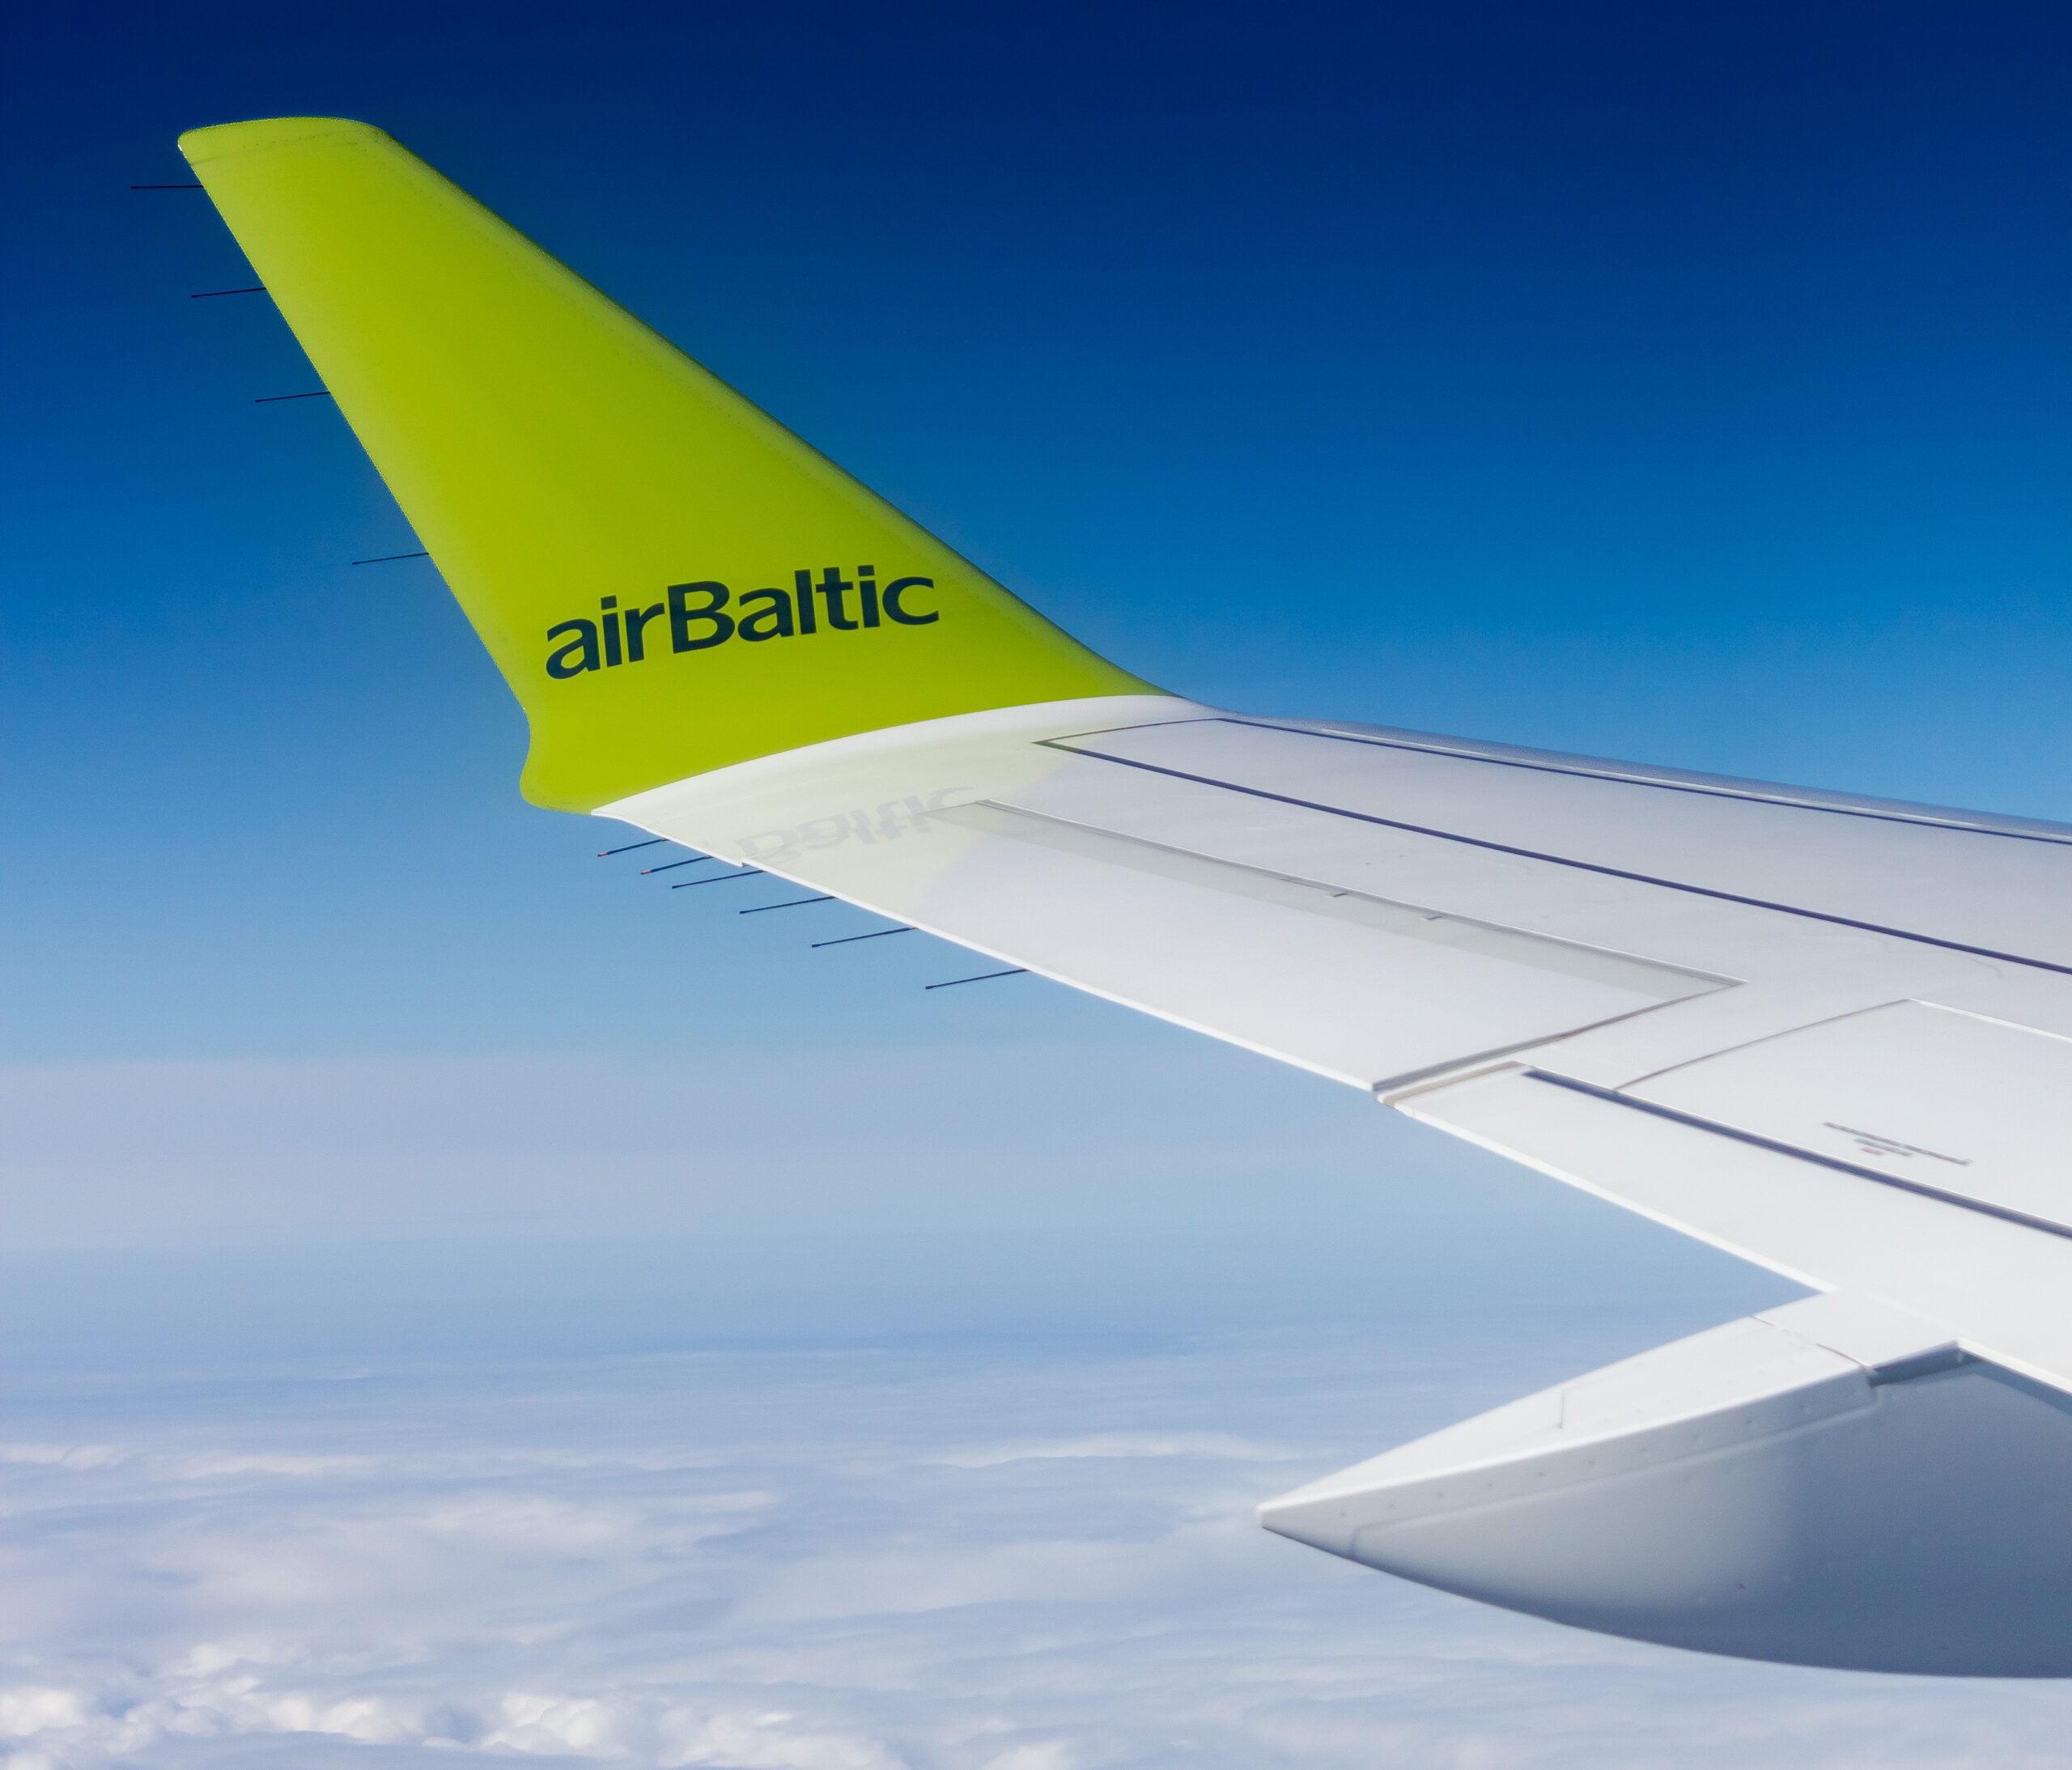 A view across the wing of an airBaltic A220 in flight.